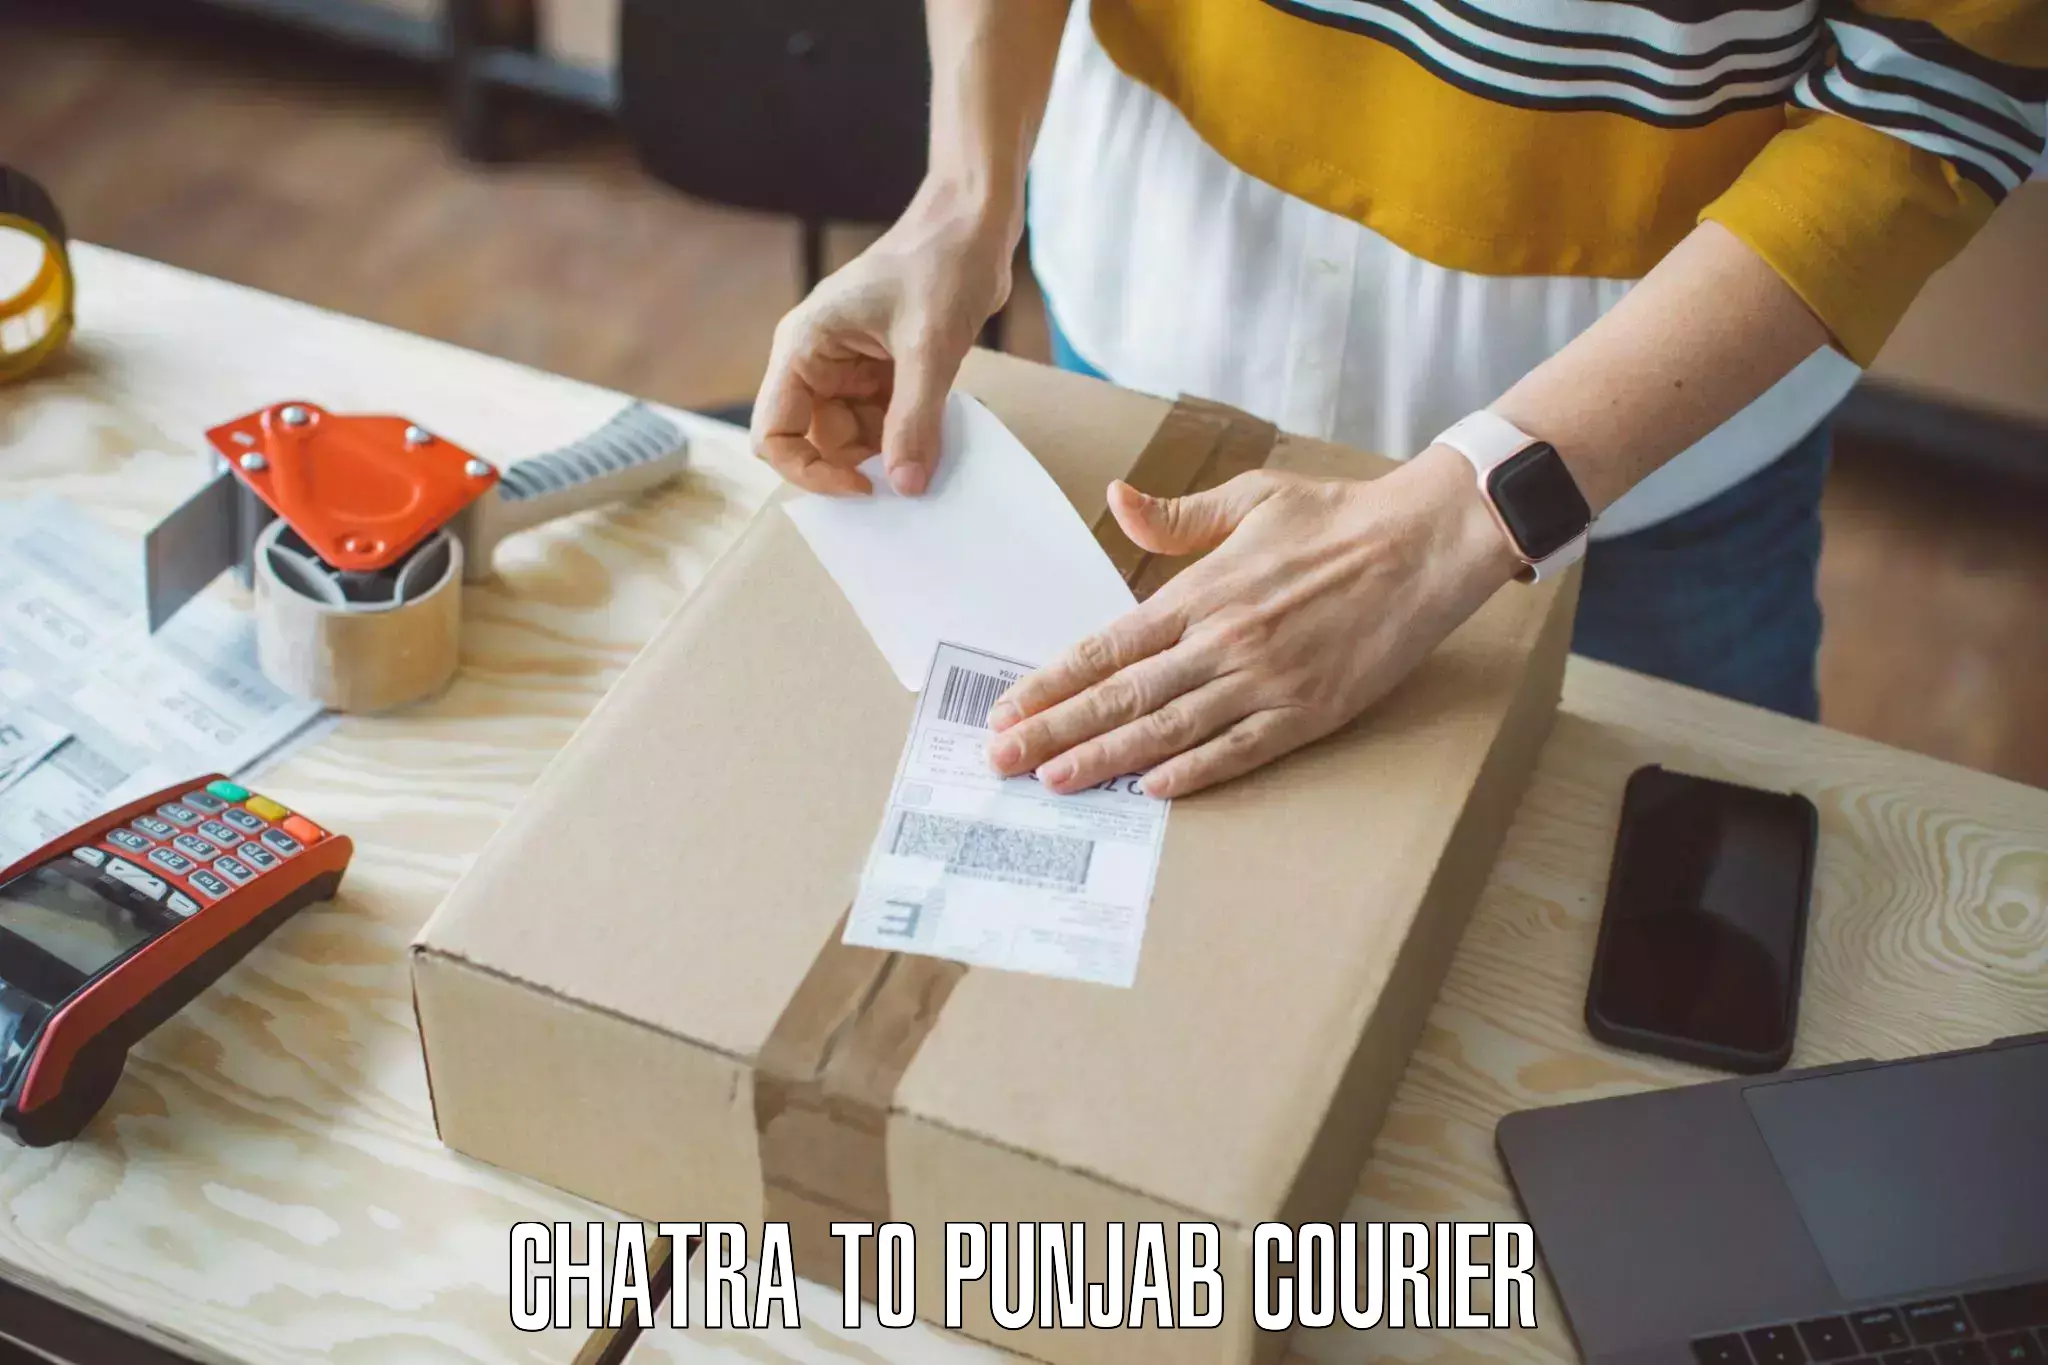 Efficient relocation services in Chatra to Punjab